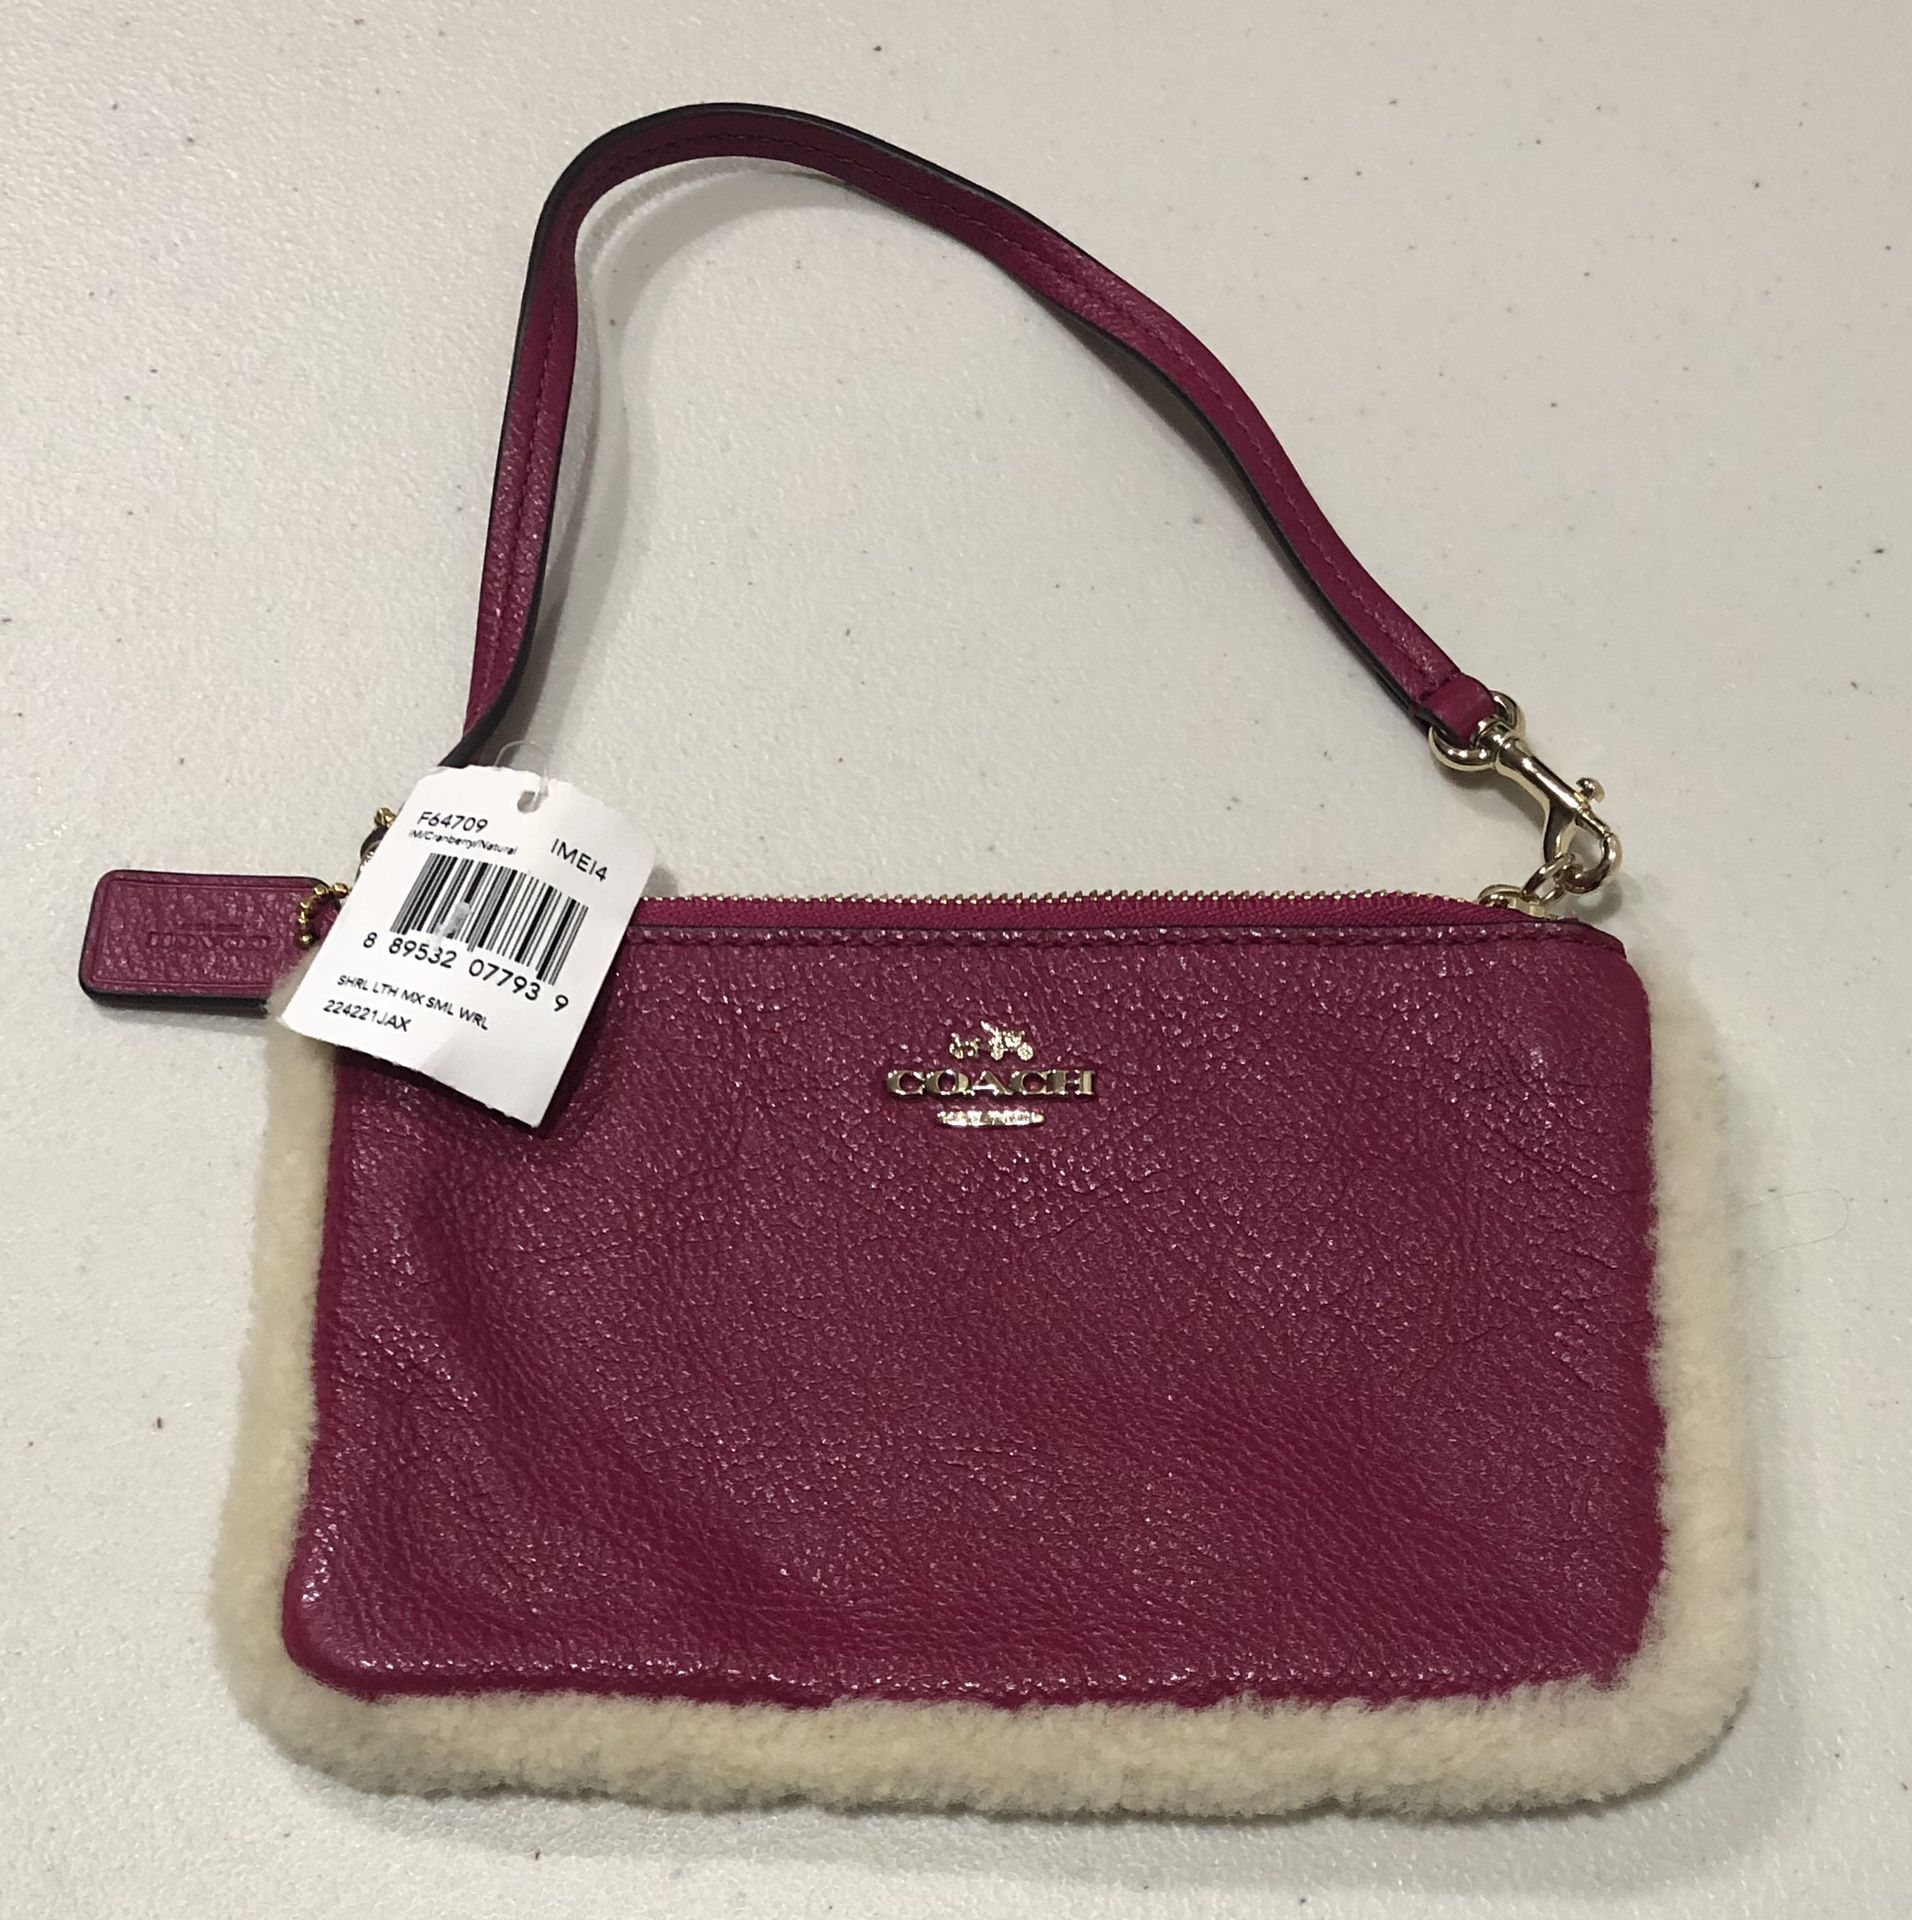 New Coach Wristlet in Leather & Shearling